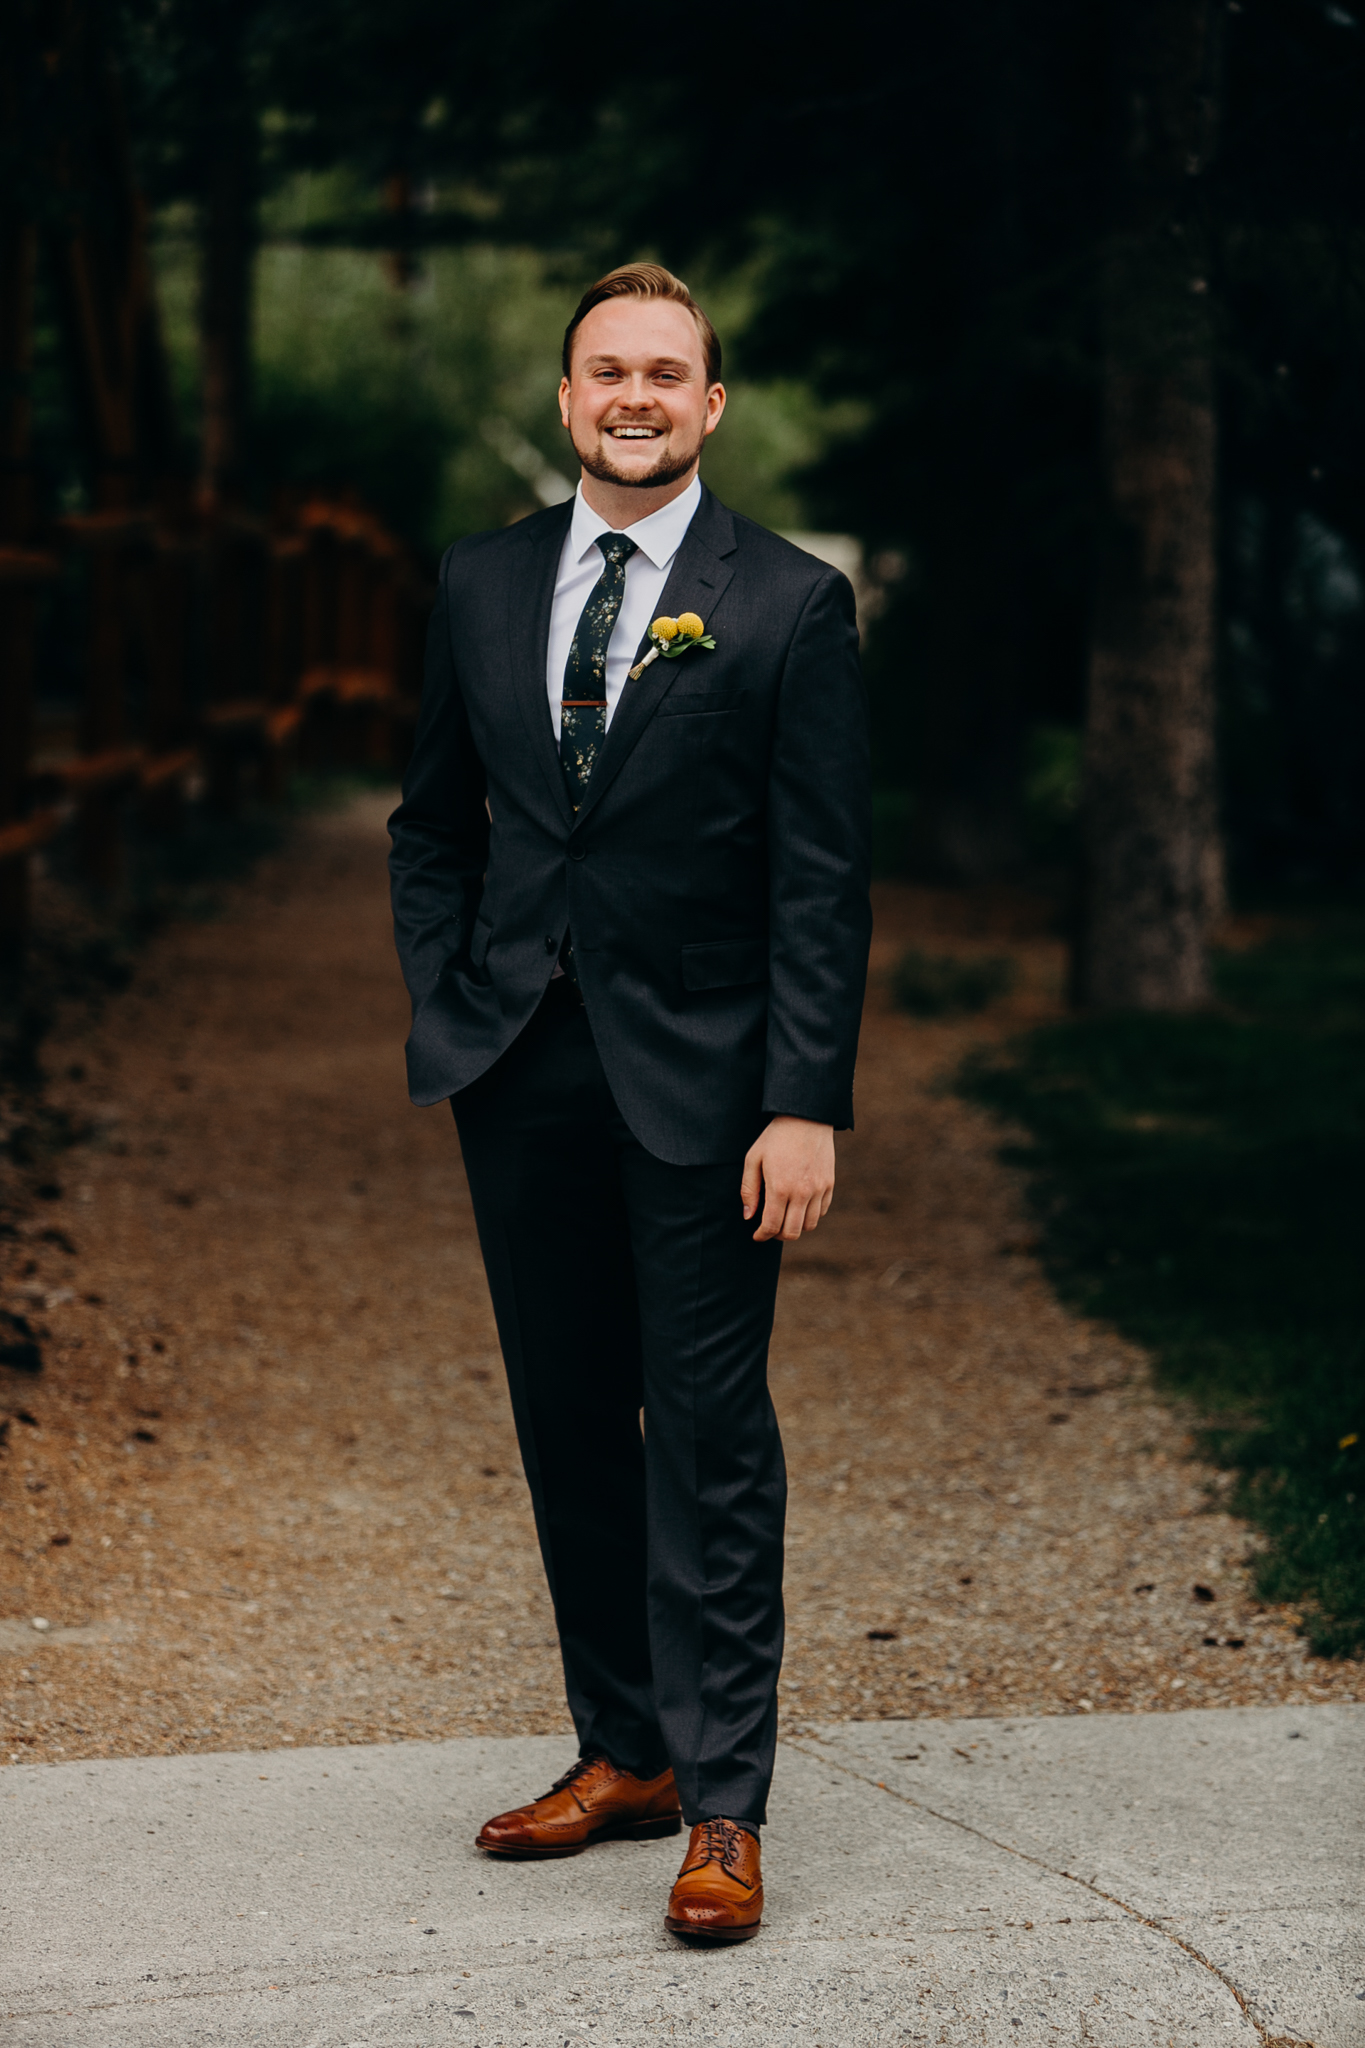 Portrait of smiling groom in suit and tie outdoors destination wedding canmore